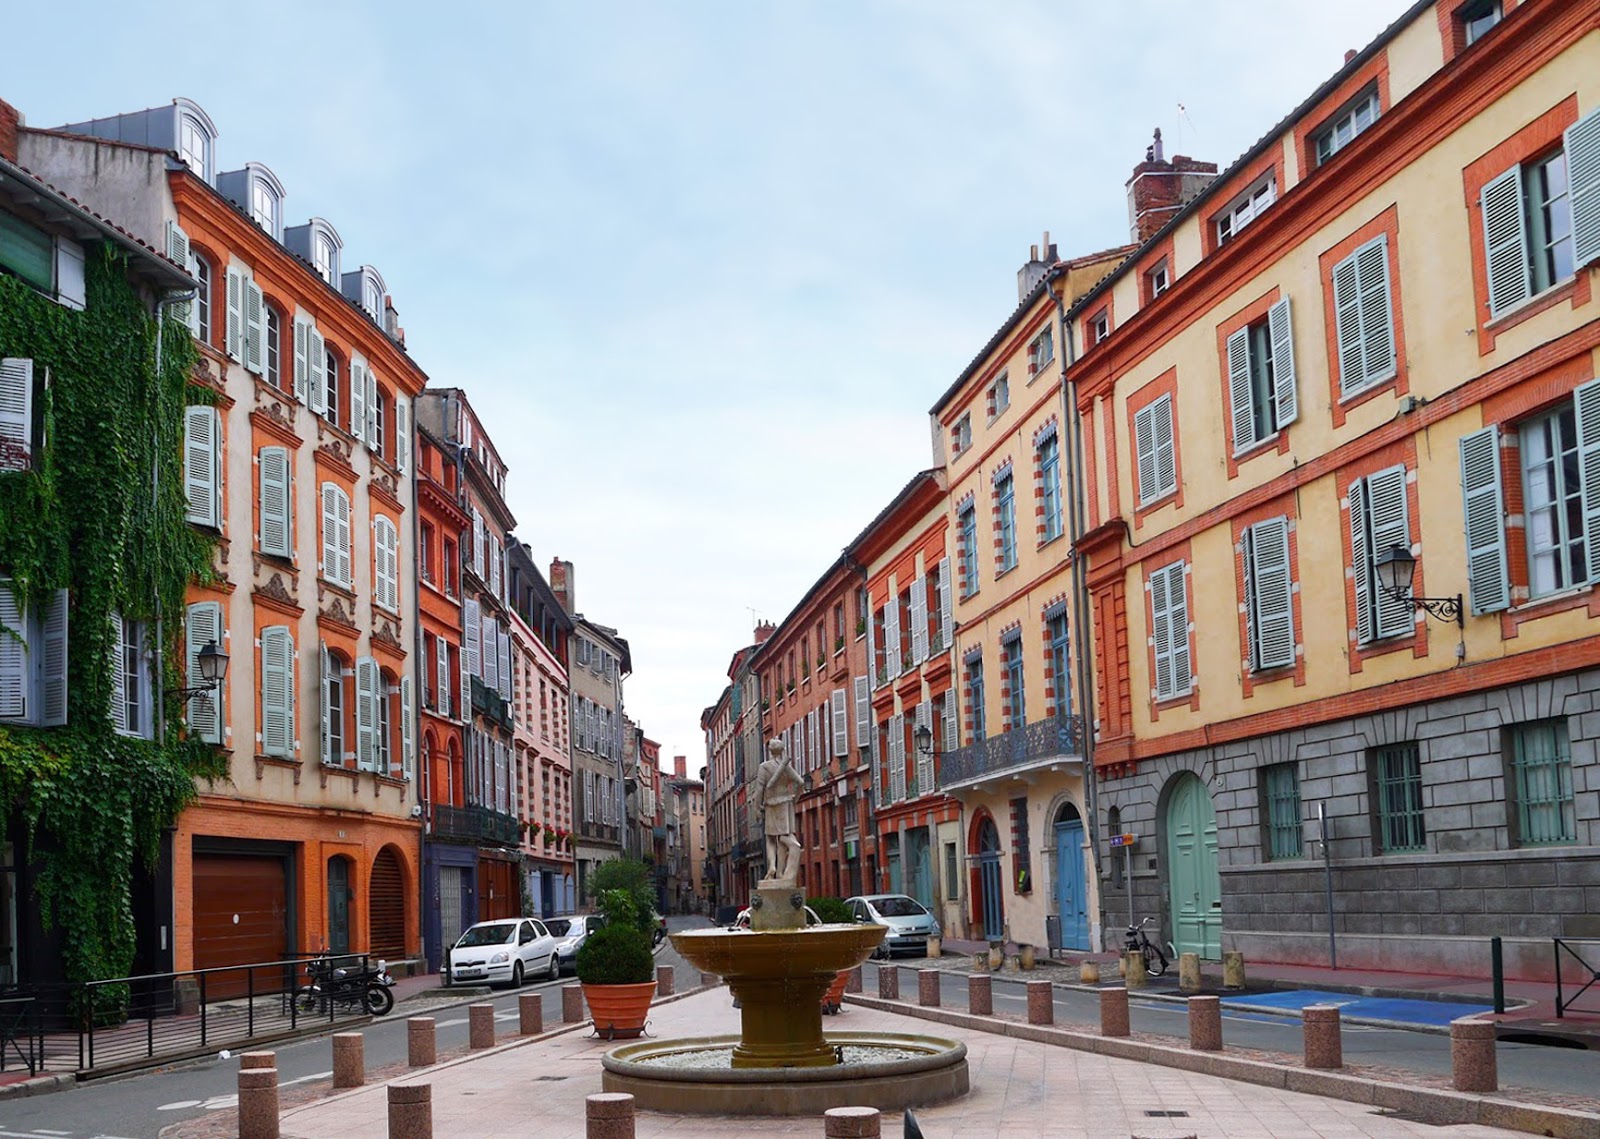 Intelliblog: TRAVEL TUESDAY #99 - TOULOUSE, FRANCE